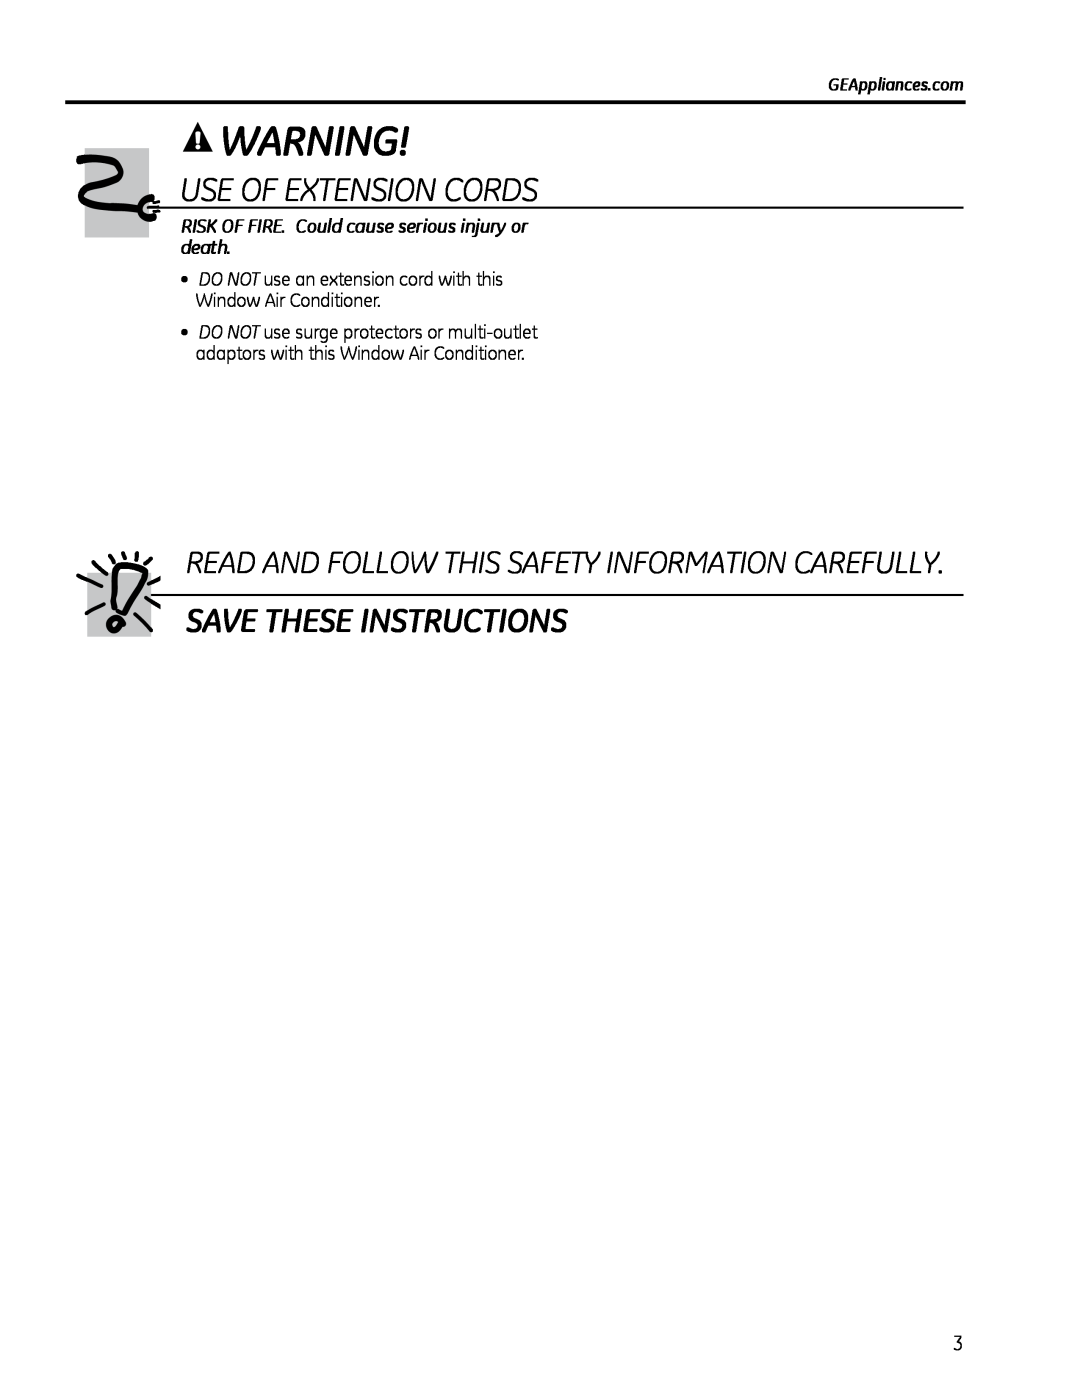 GE 880 Use Of Extension Cords, Save These Instructions, READ AND FOLLOW THIS SAFETY INFORmATION CAREFULLY 